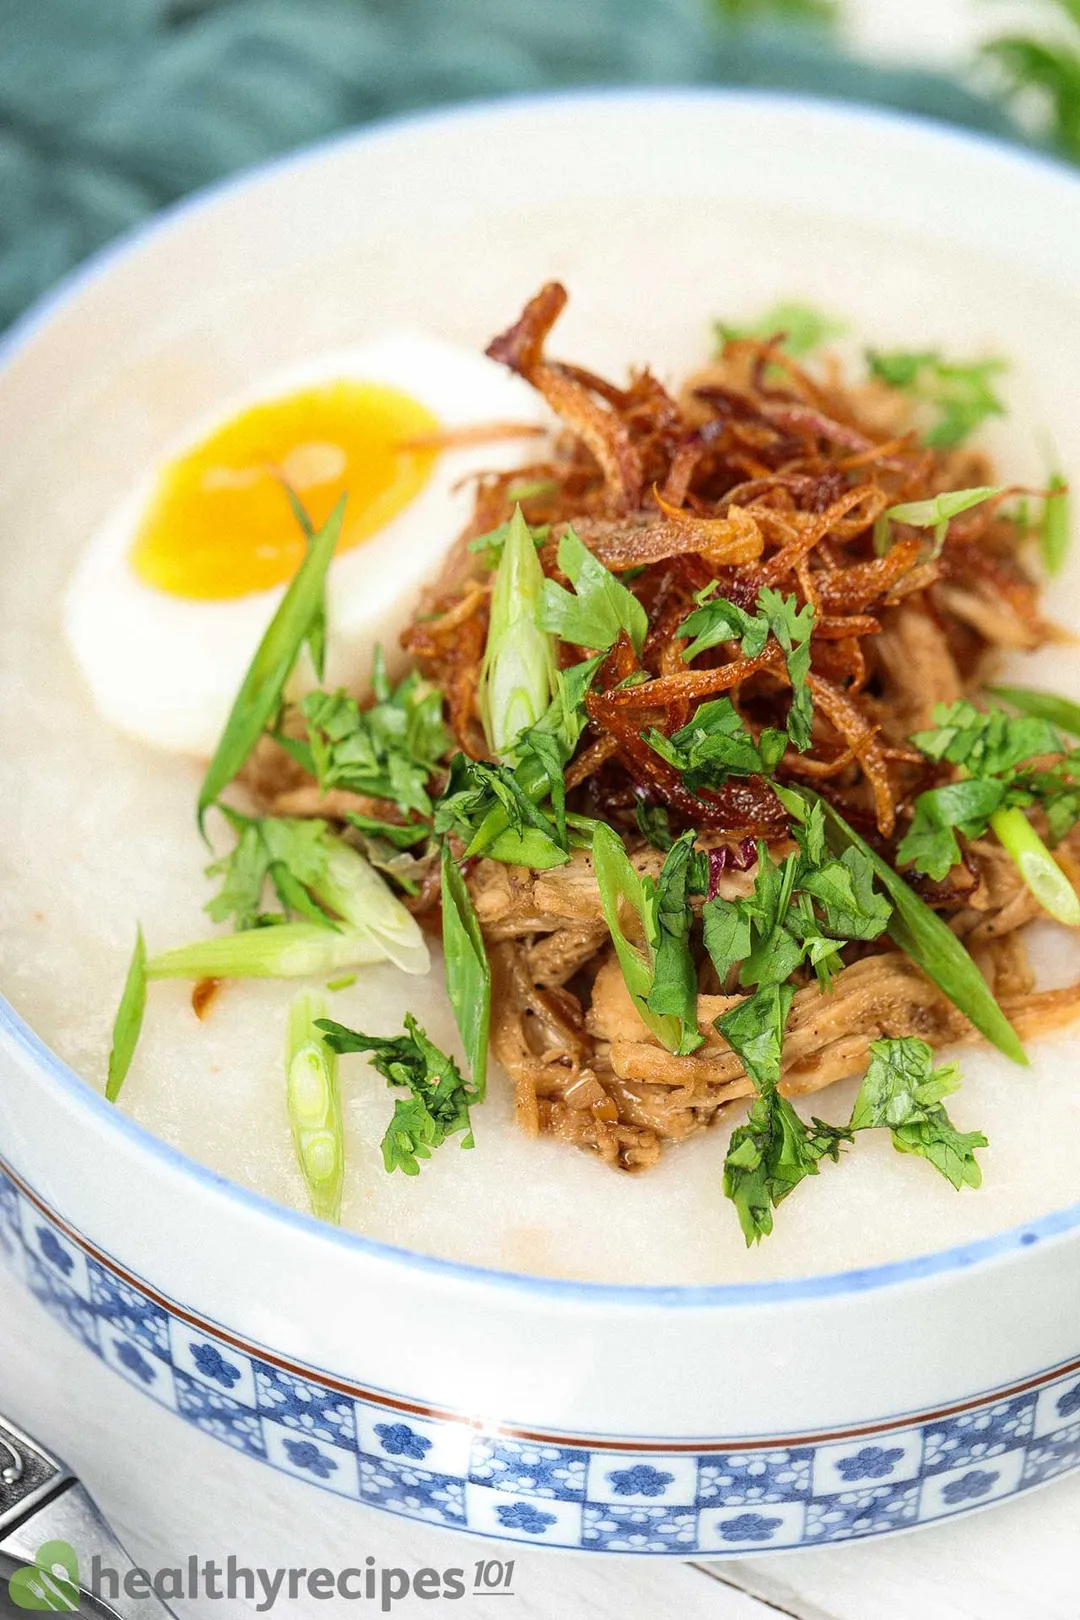 A bowl of chicken congee served with eggs, fried shallots, and herbs